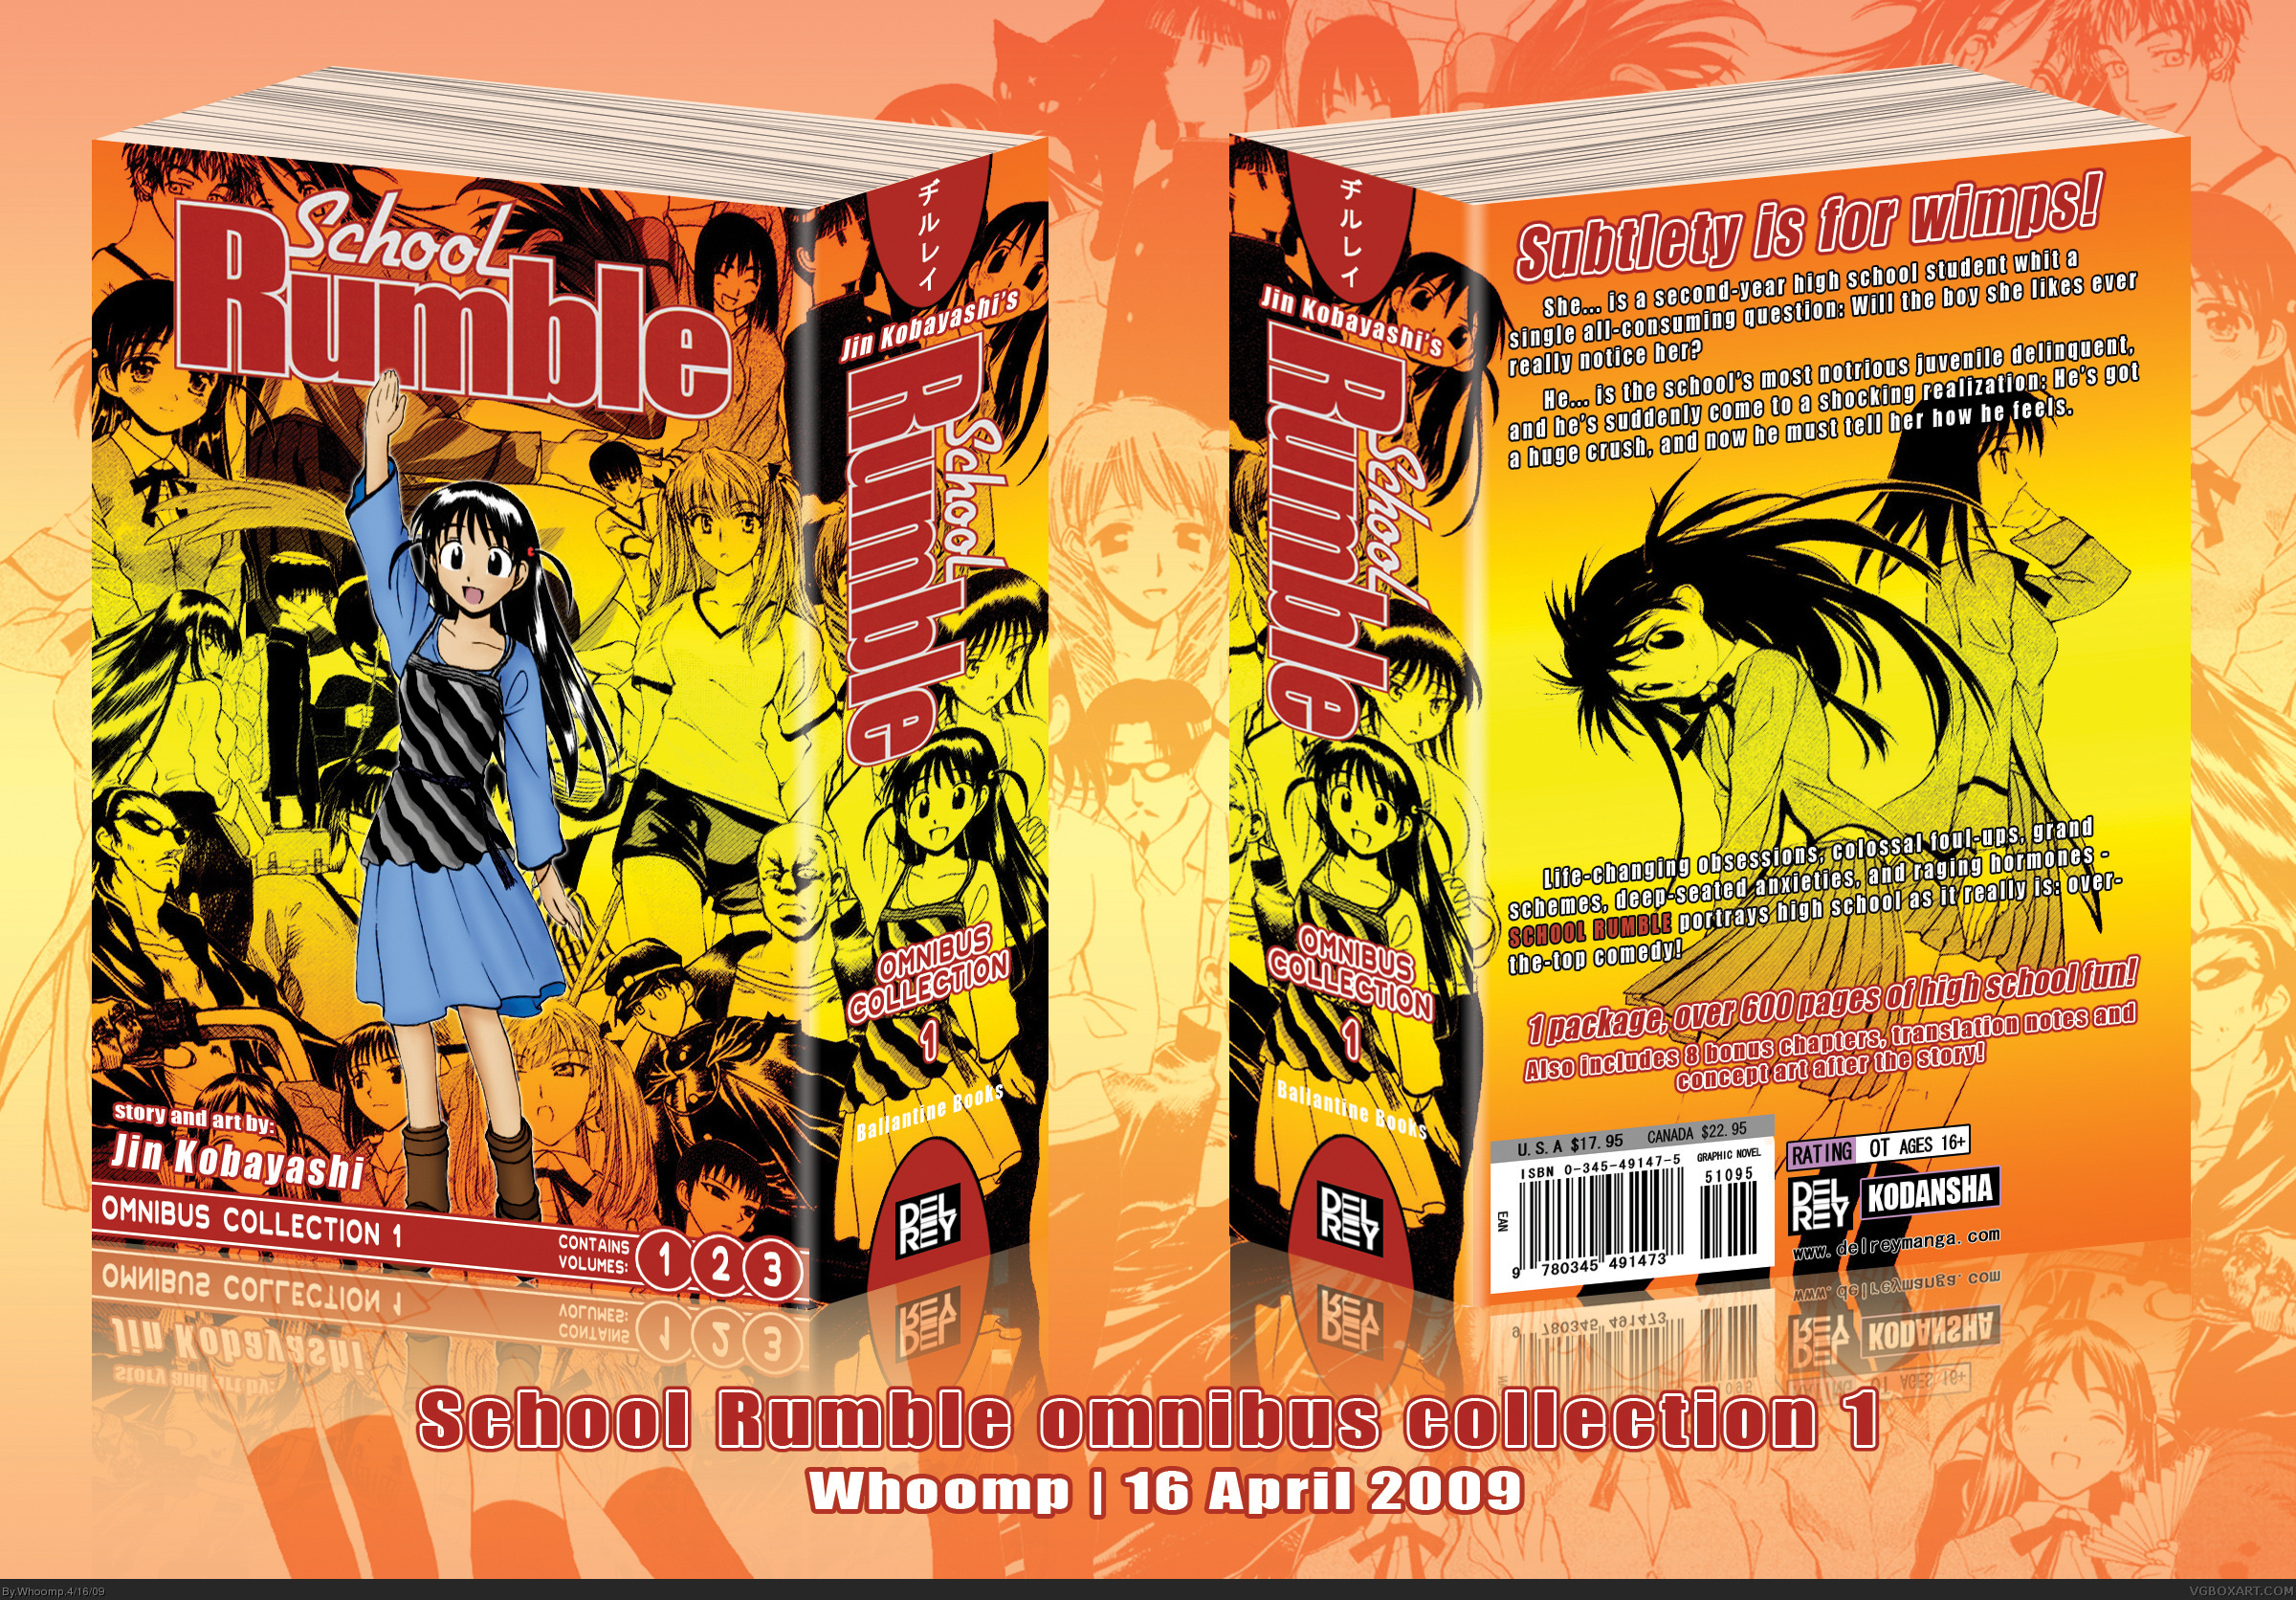 School Rumble Omnibus Collection 1 box cover